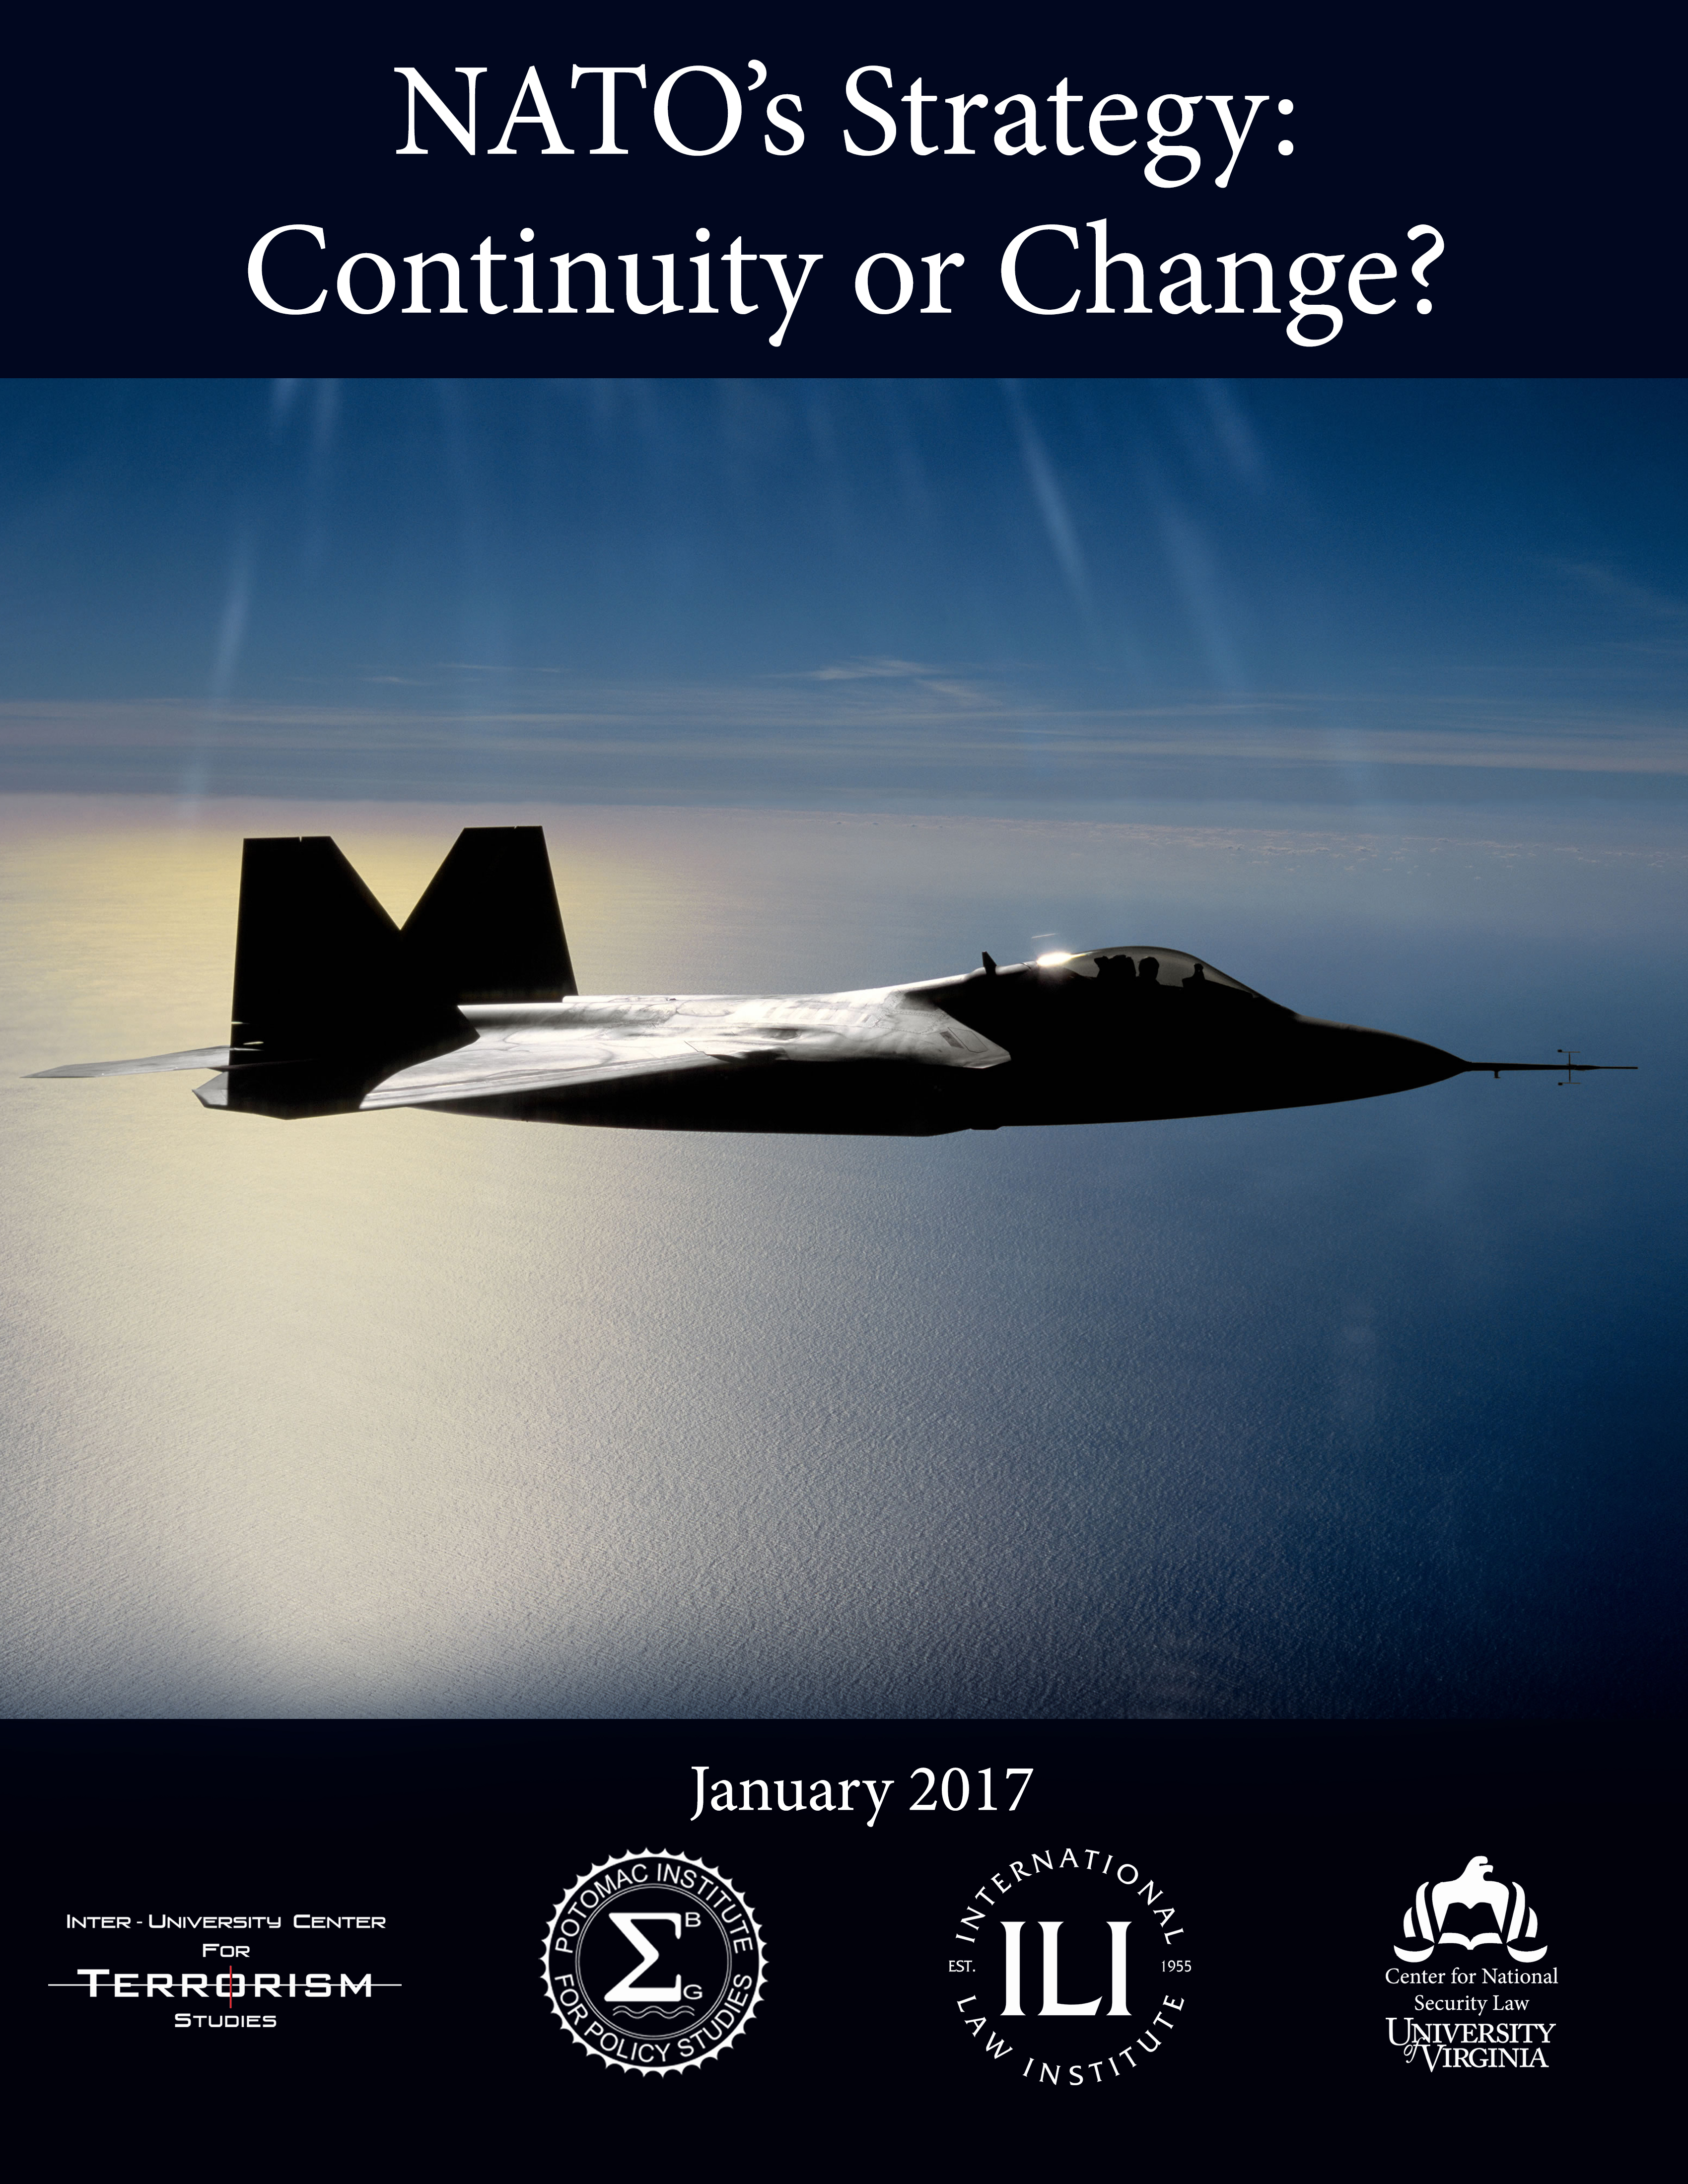 NATO's Strategy: Continuity or Change?